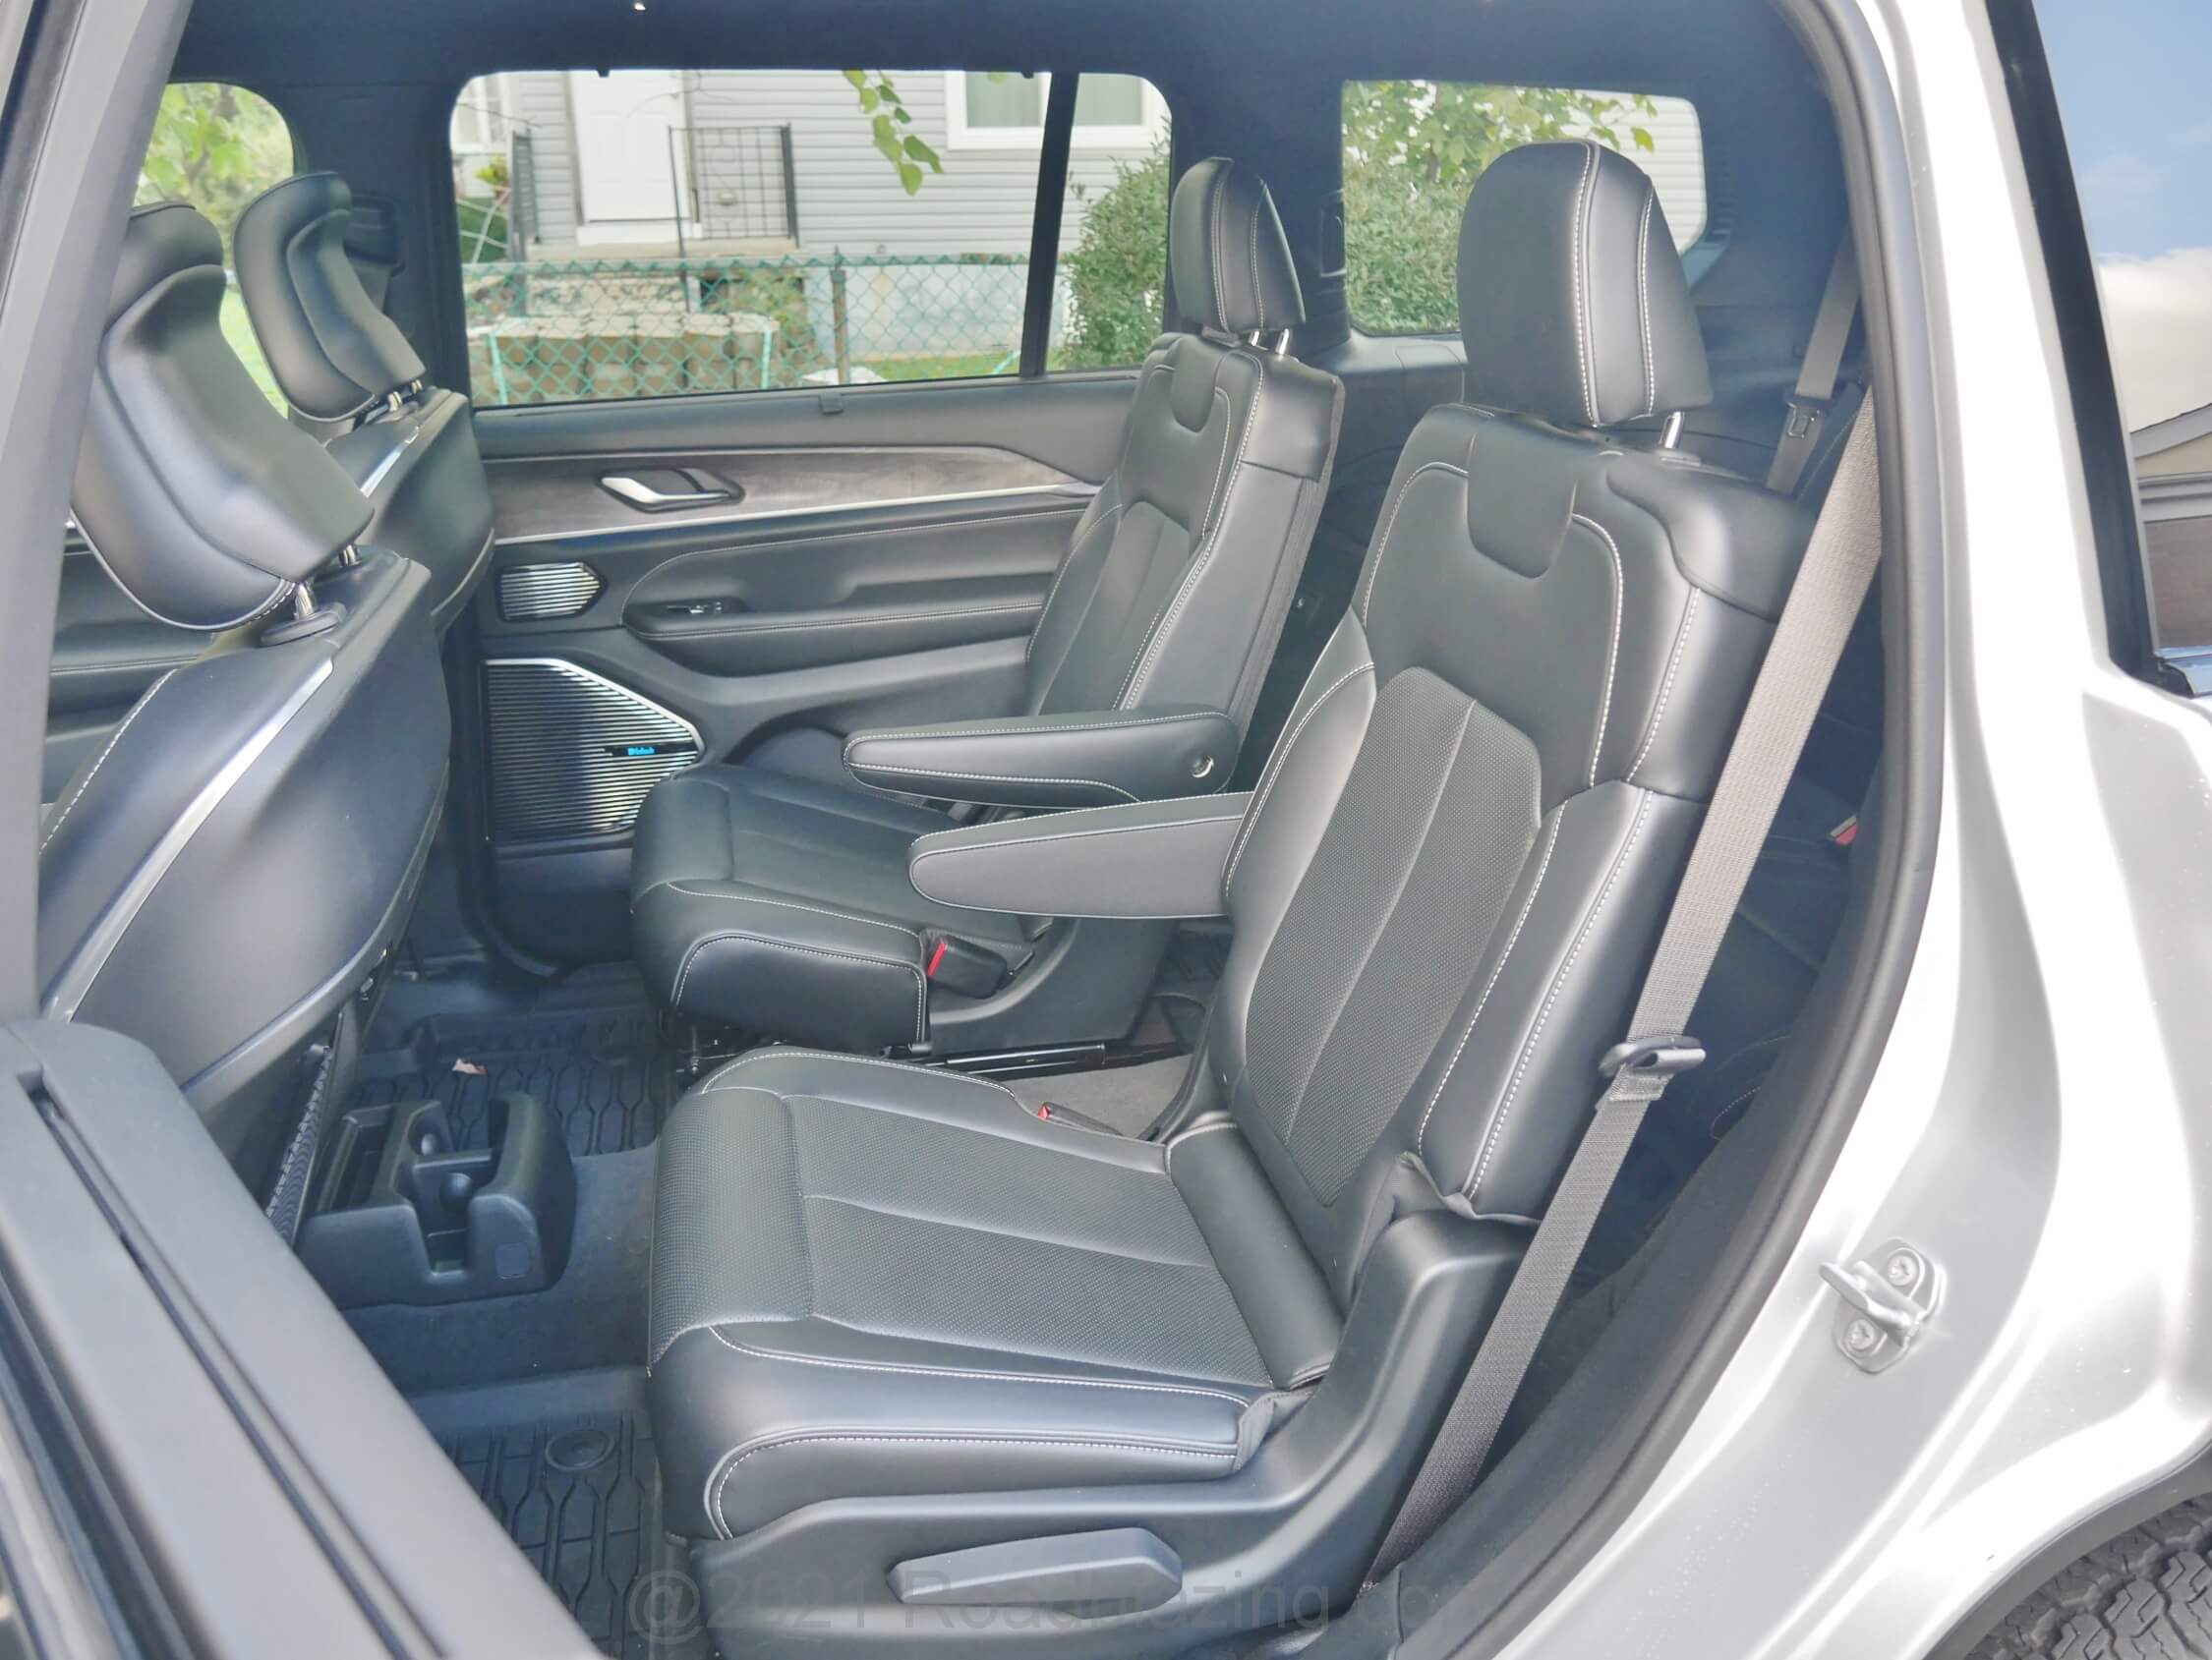 2021 Jeep Grand Cherokee L Overland 5.7L 4x4: standard Row 2 captain chair seating, w/ opt. heating & power seatback fold